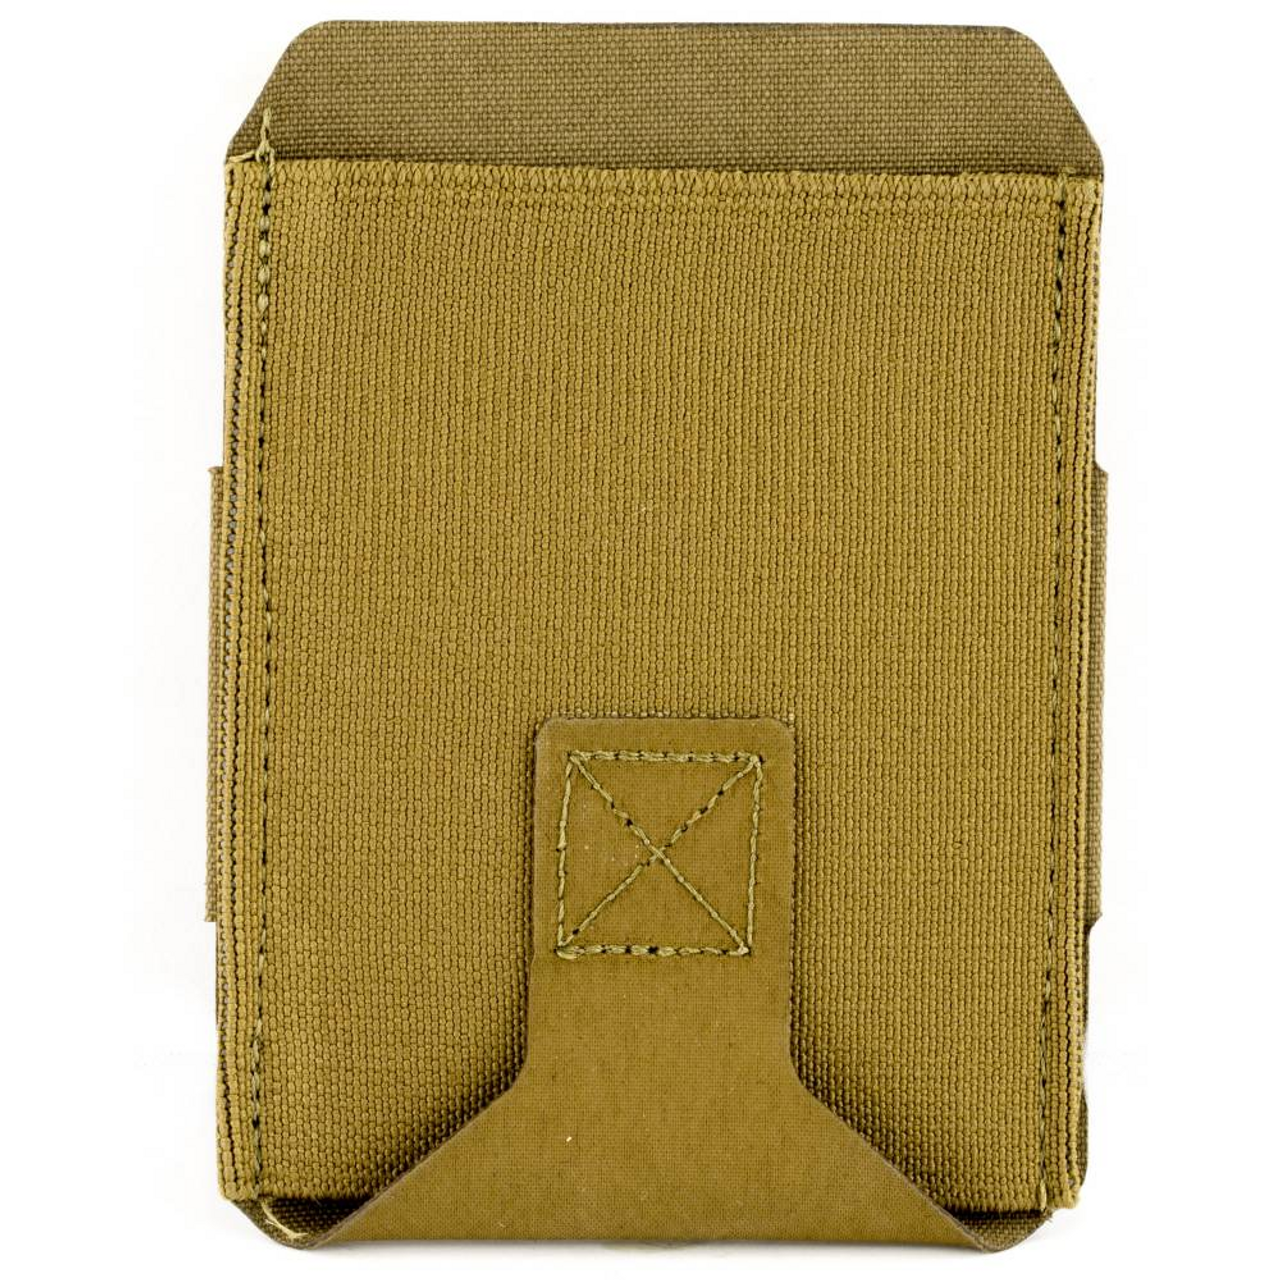 BFG High Rise M4 Belt Pouch, Coyote Brown